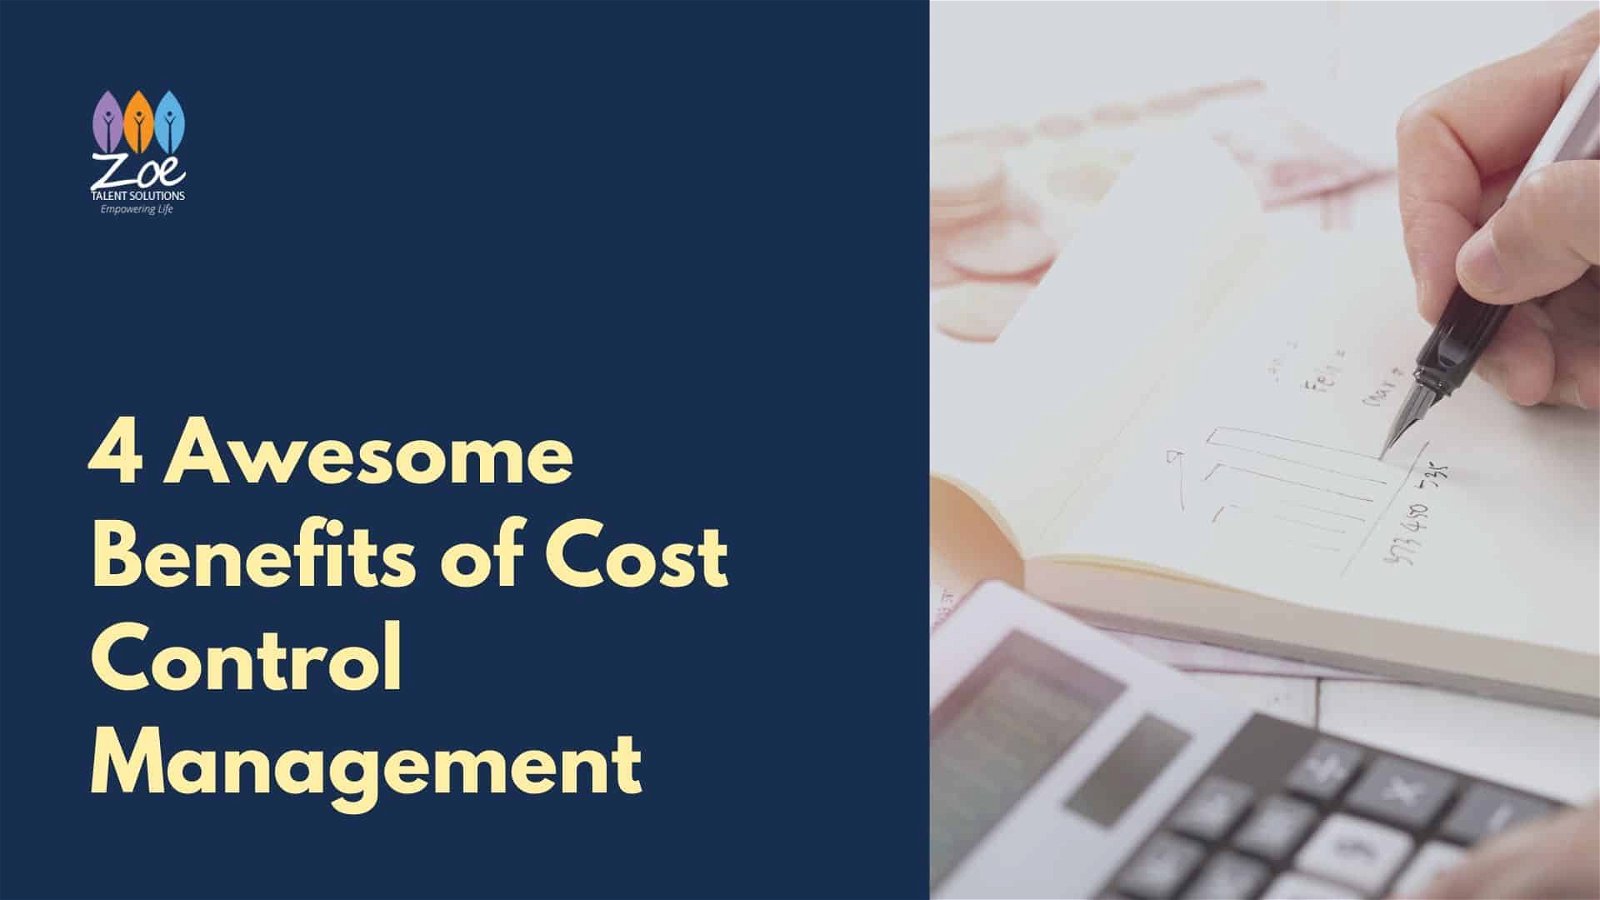 4 Awesome Benefits of Cost Control Management